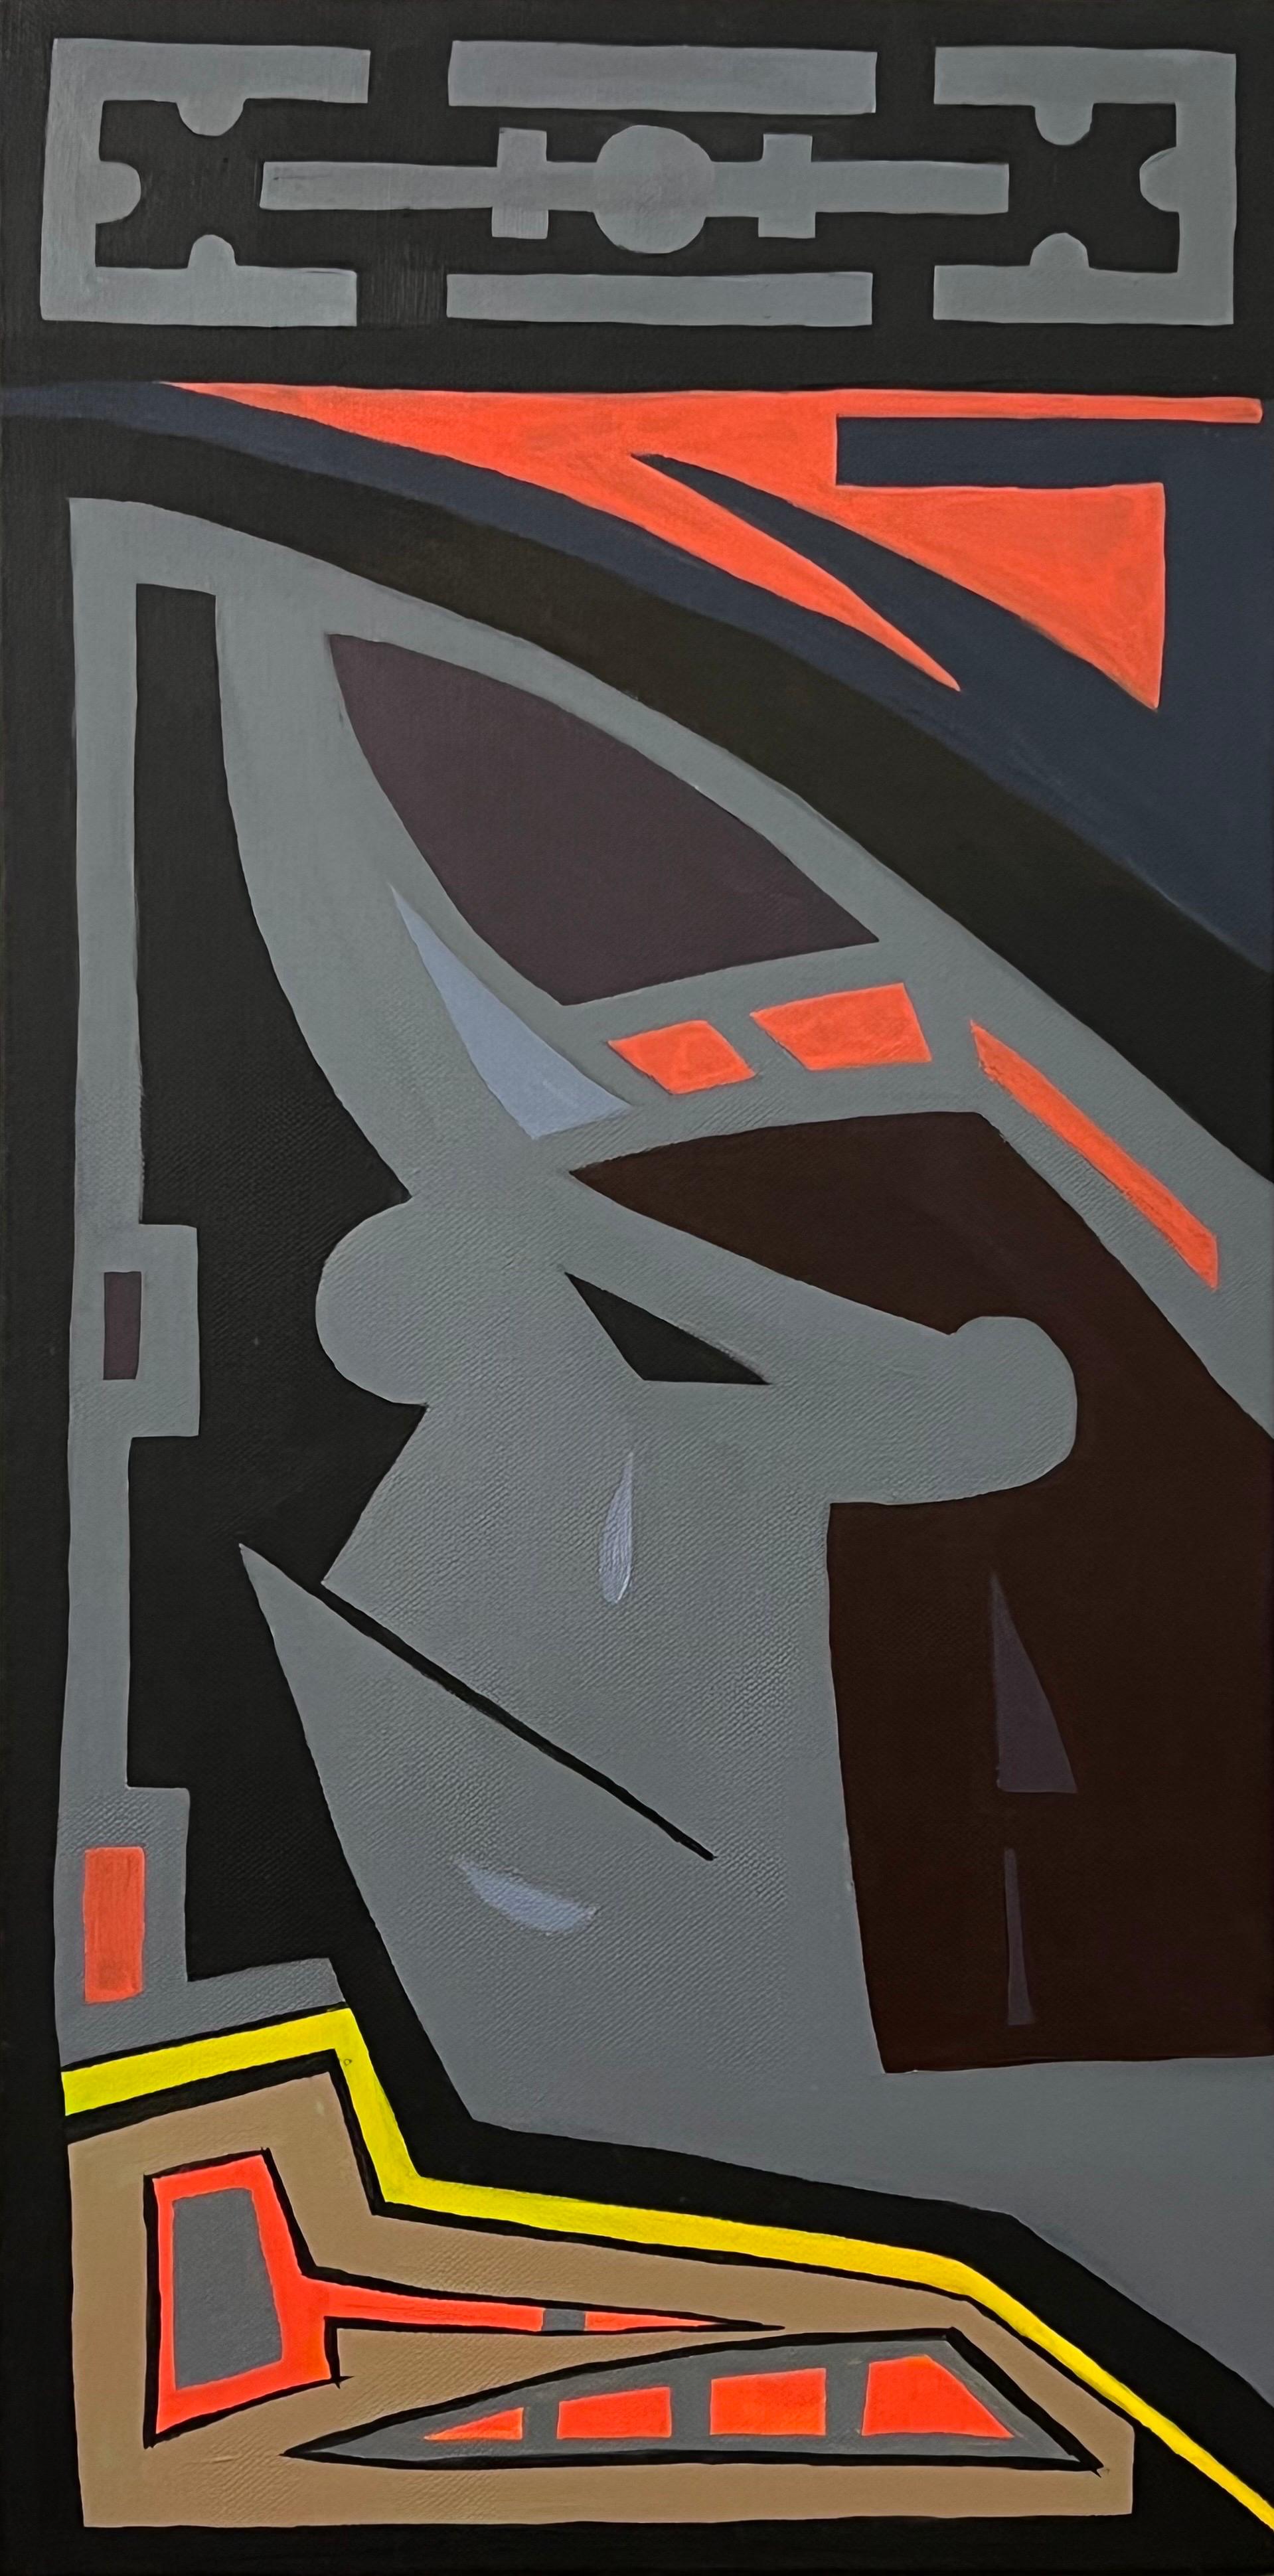 'Crying Aztec' Tribal Cartoon Painting on Canvas by Contemporary British Artist For Sale 6